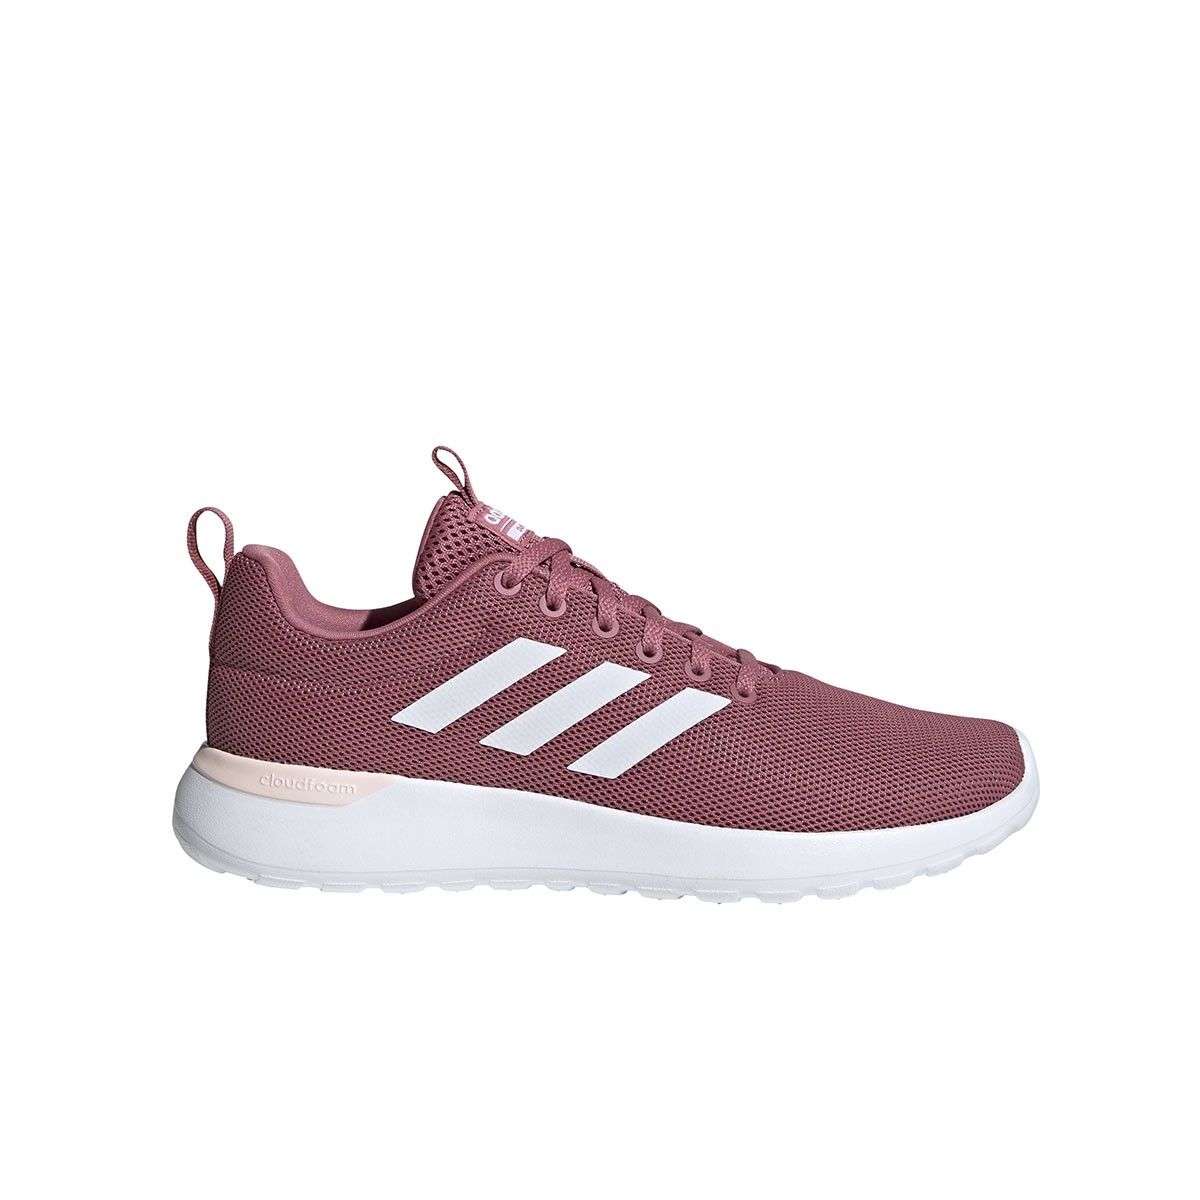 Hassy Paine Gillic composiet Adidas Lite Racer Cln Trace Maroon Ftwr White Pink Tint